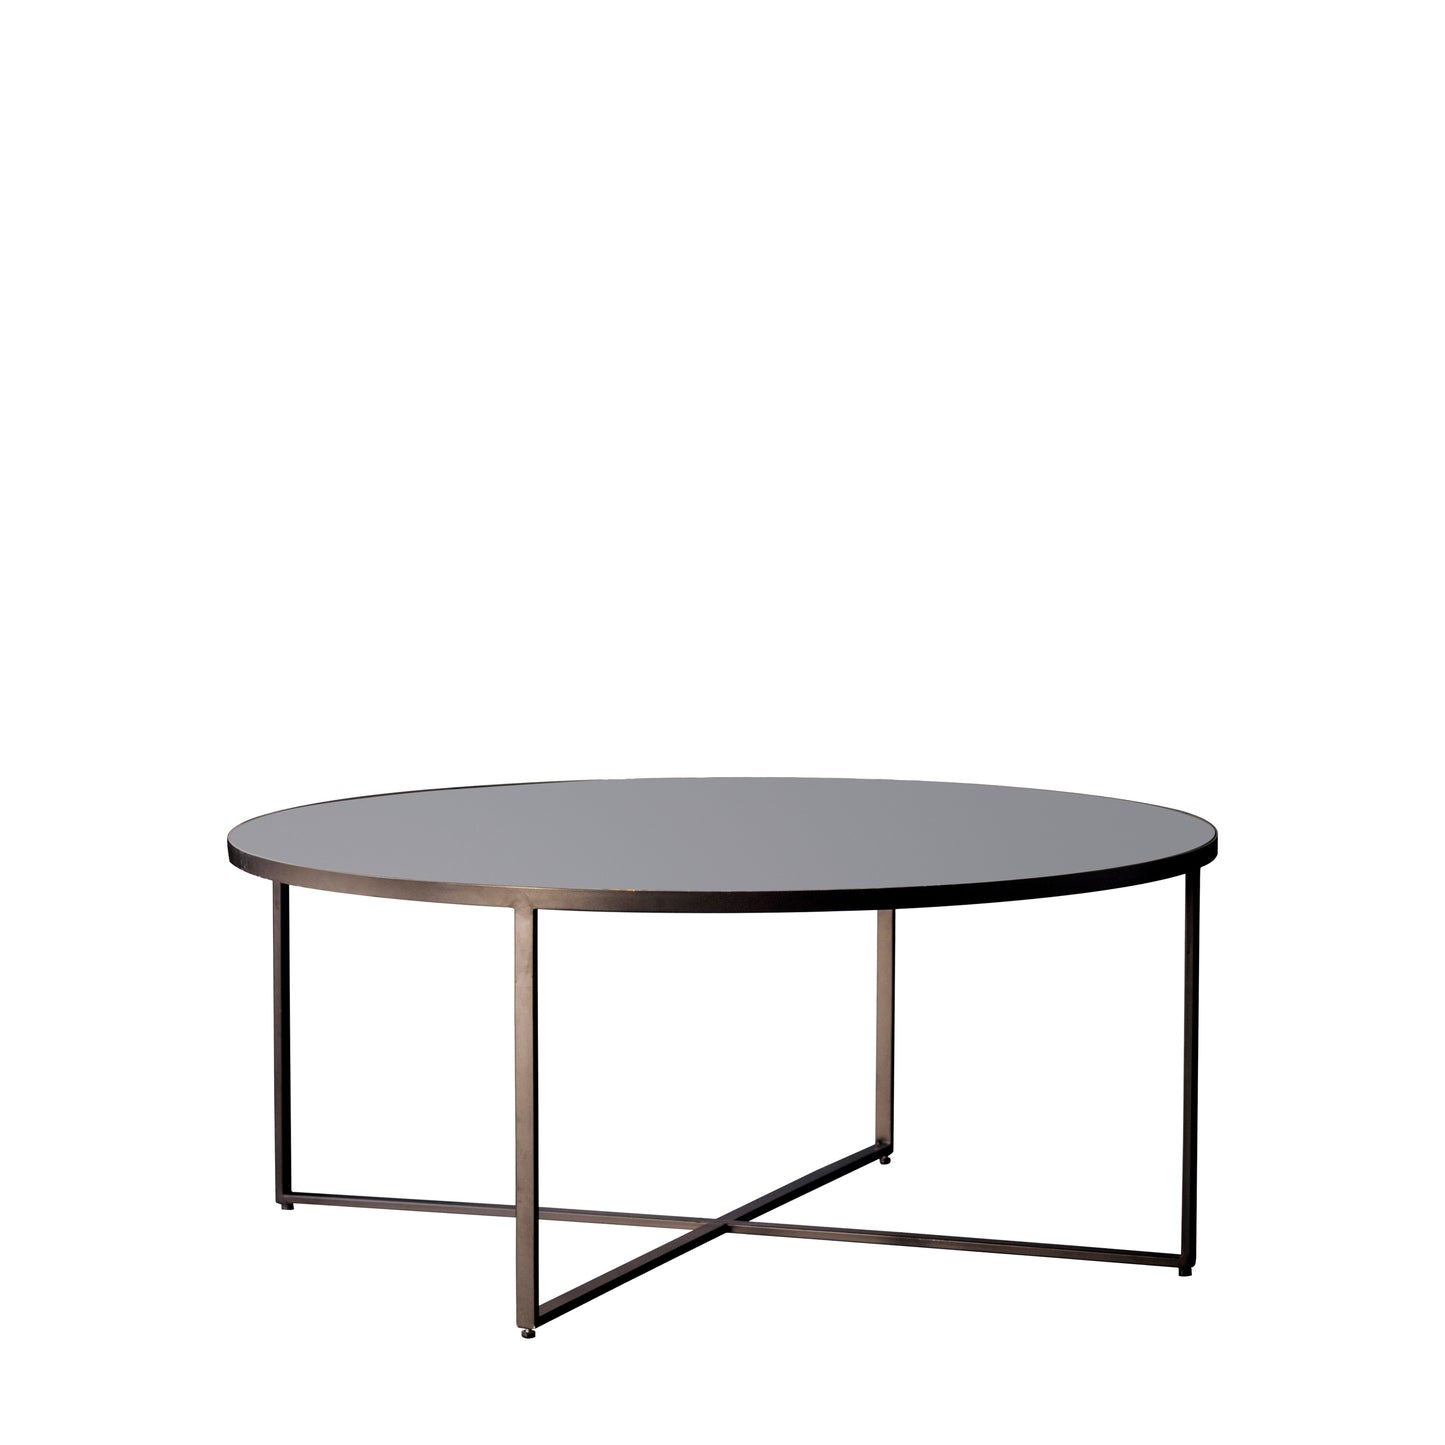 A Torrance Coffee Table with a metal frame and a glass top, perfect for home furniture and interior decor.